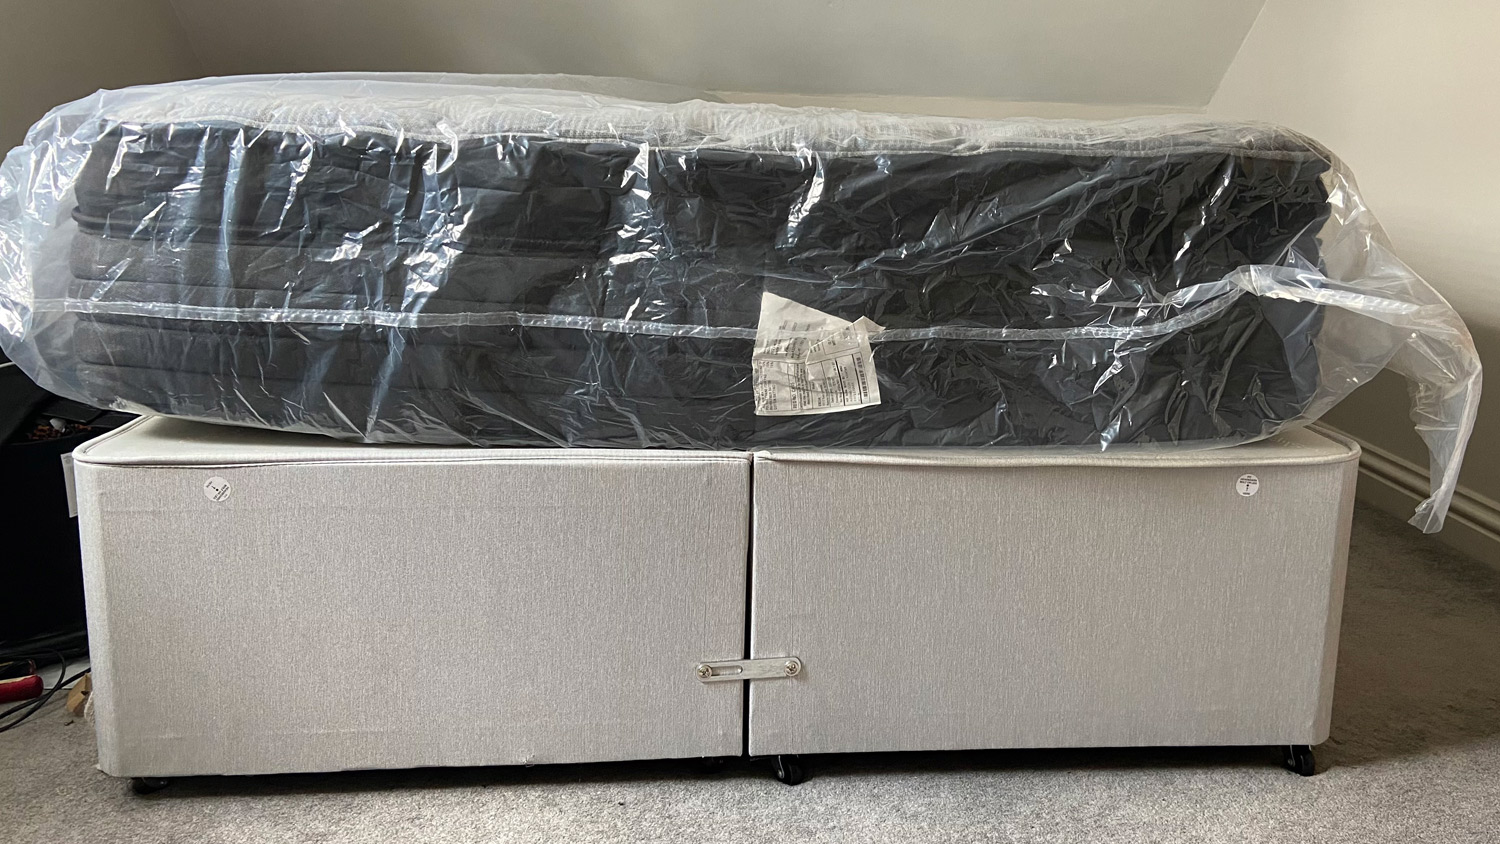 The Zoma Boost mattress on a bed, wrapped in plastic